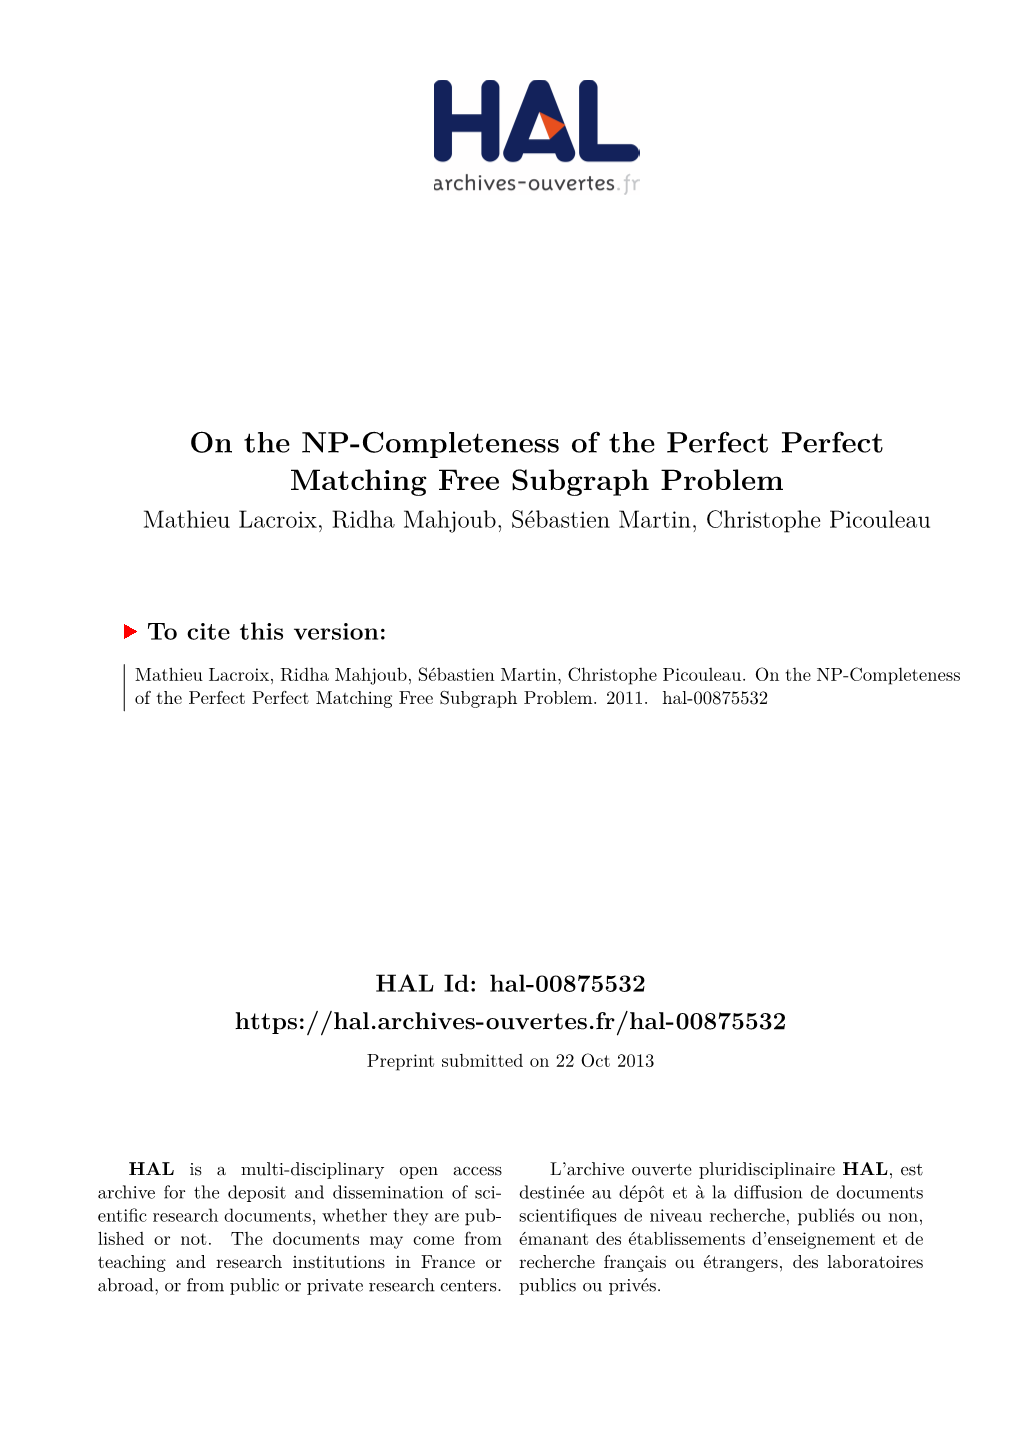 On the NP-Completeness of the Perfect Perfect Matching Free Subgraph Problem Mathieu Lacroix, Ridha Mahjoub, Sébastien Martin, Christophe Picouleau